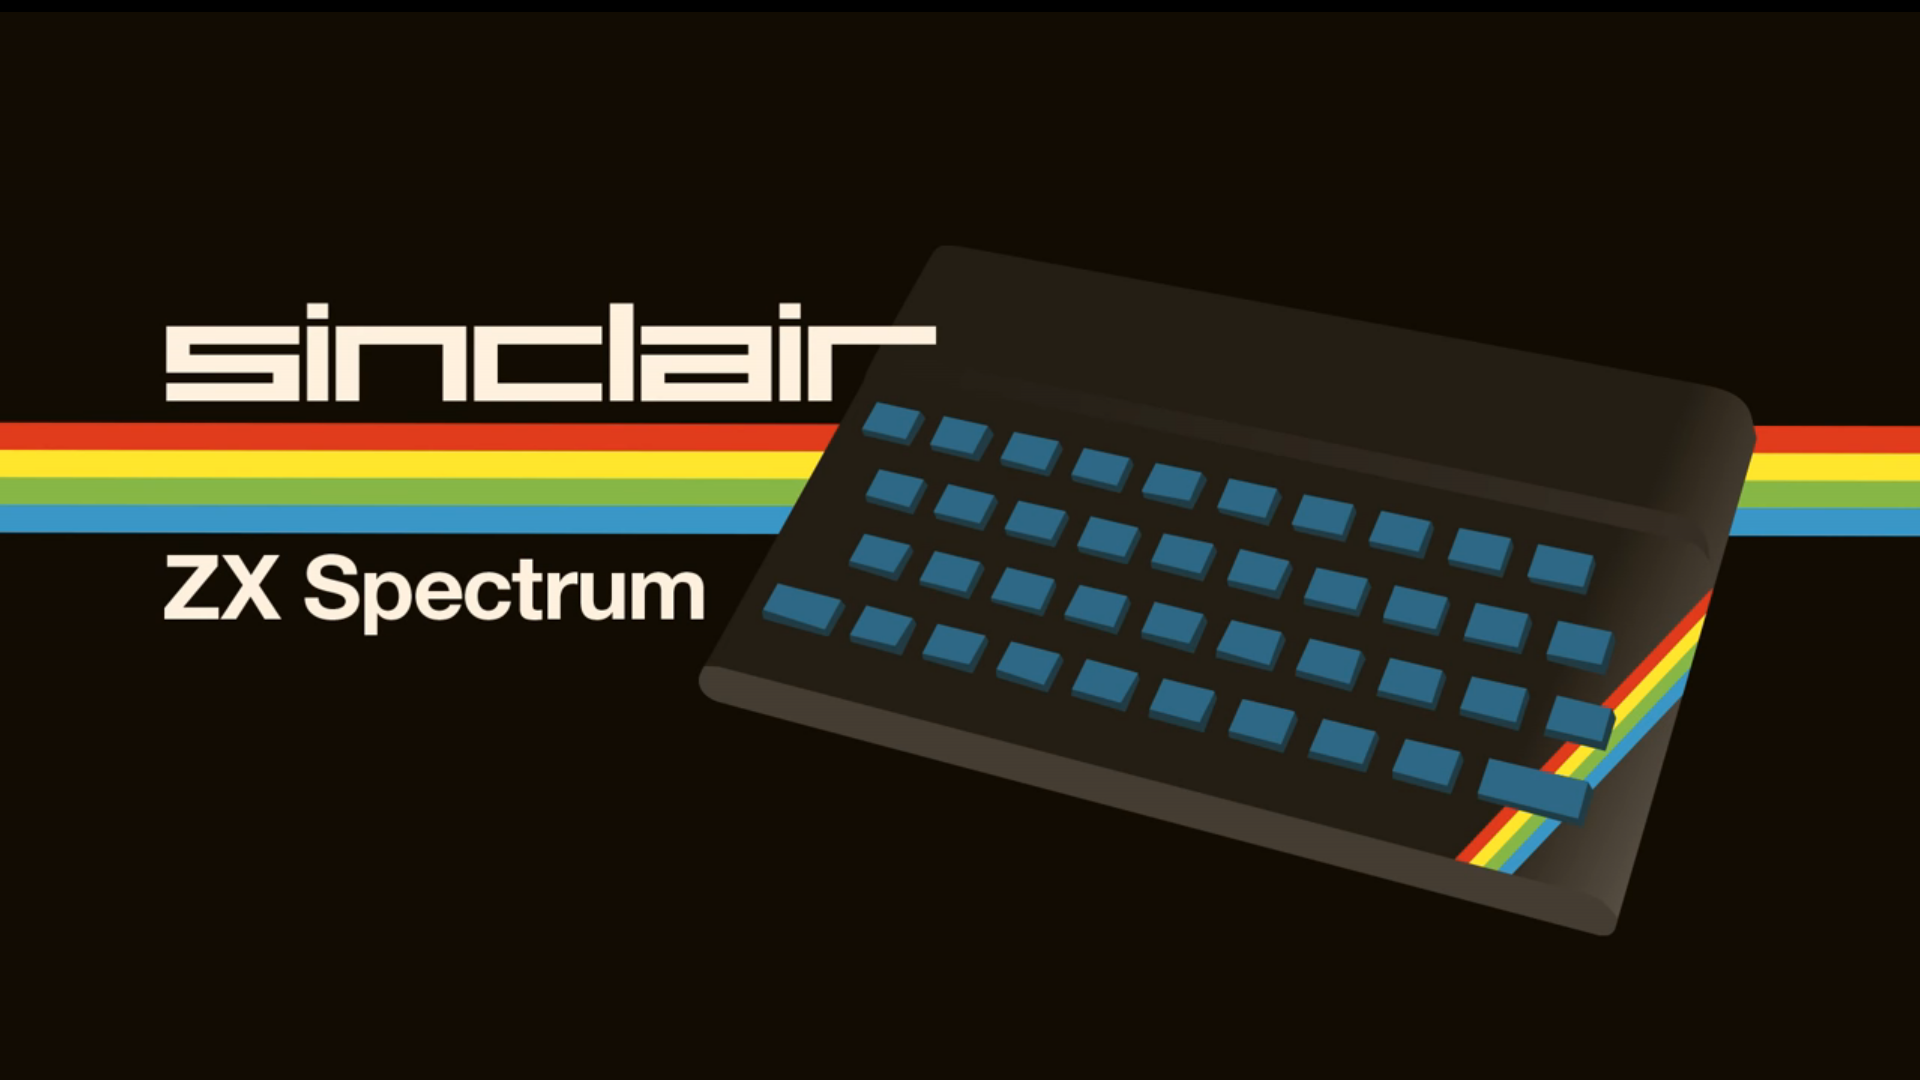 General 1920x1080 technology Retro computers Zx Spectrum  minimalism text simple background brand